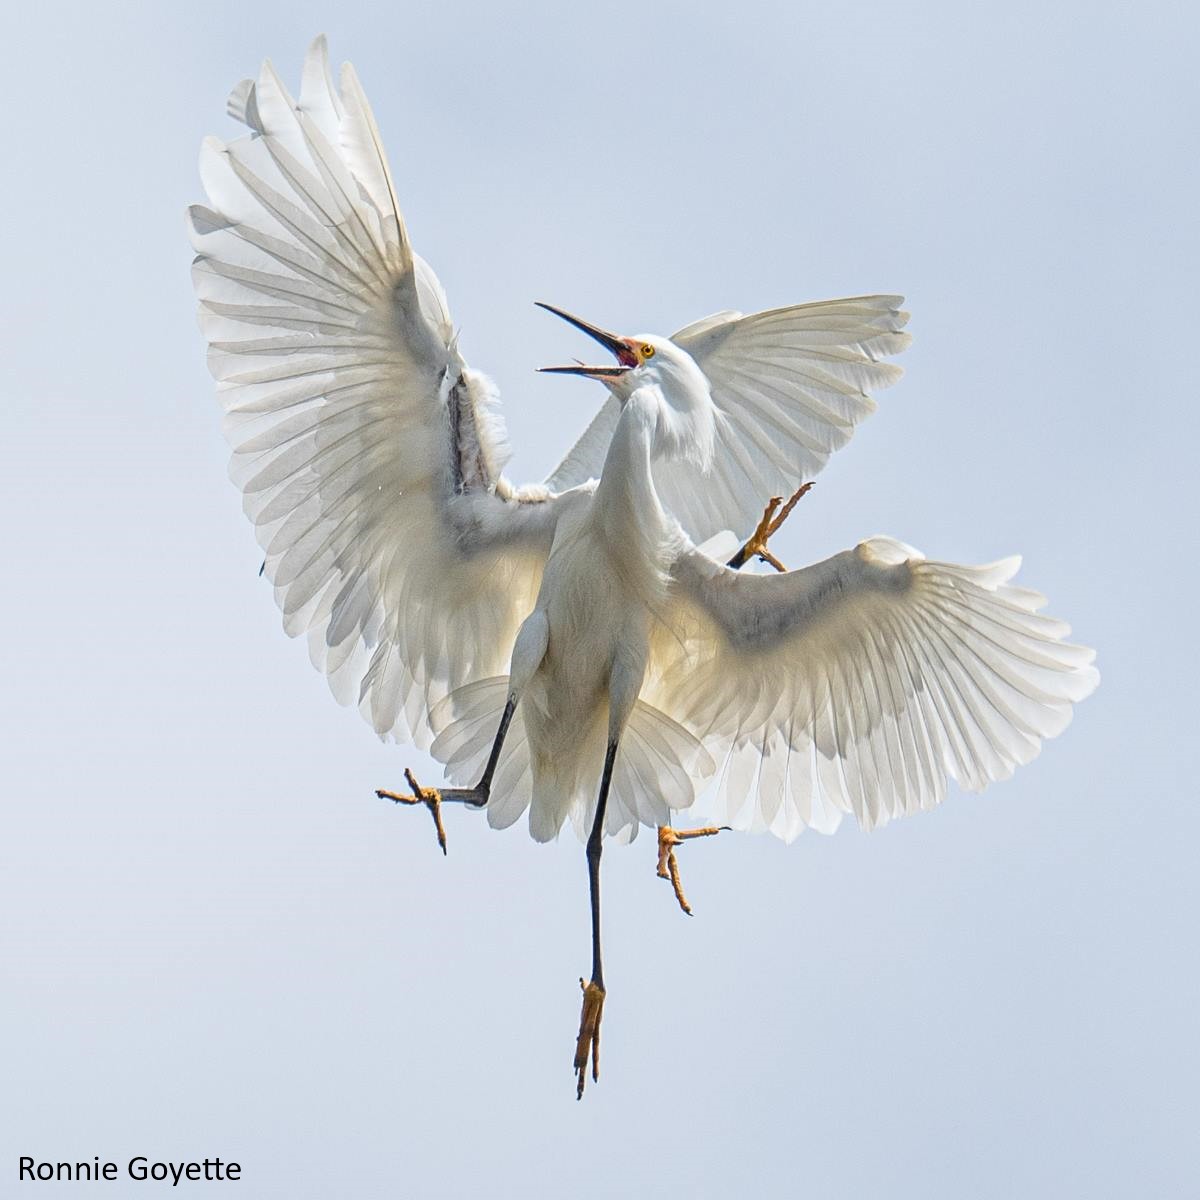 Photo of a snowy egret in mid-air with wings spread out. It appears it's about to be attacked from behind by another snowy egret.